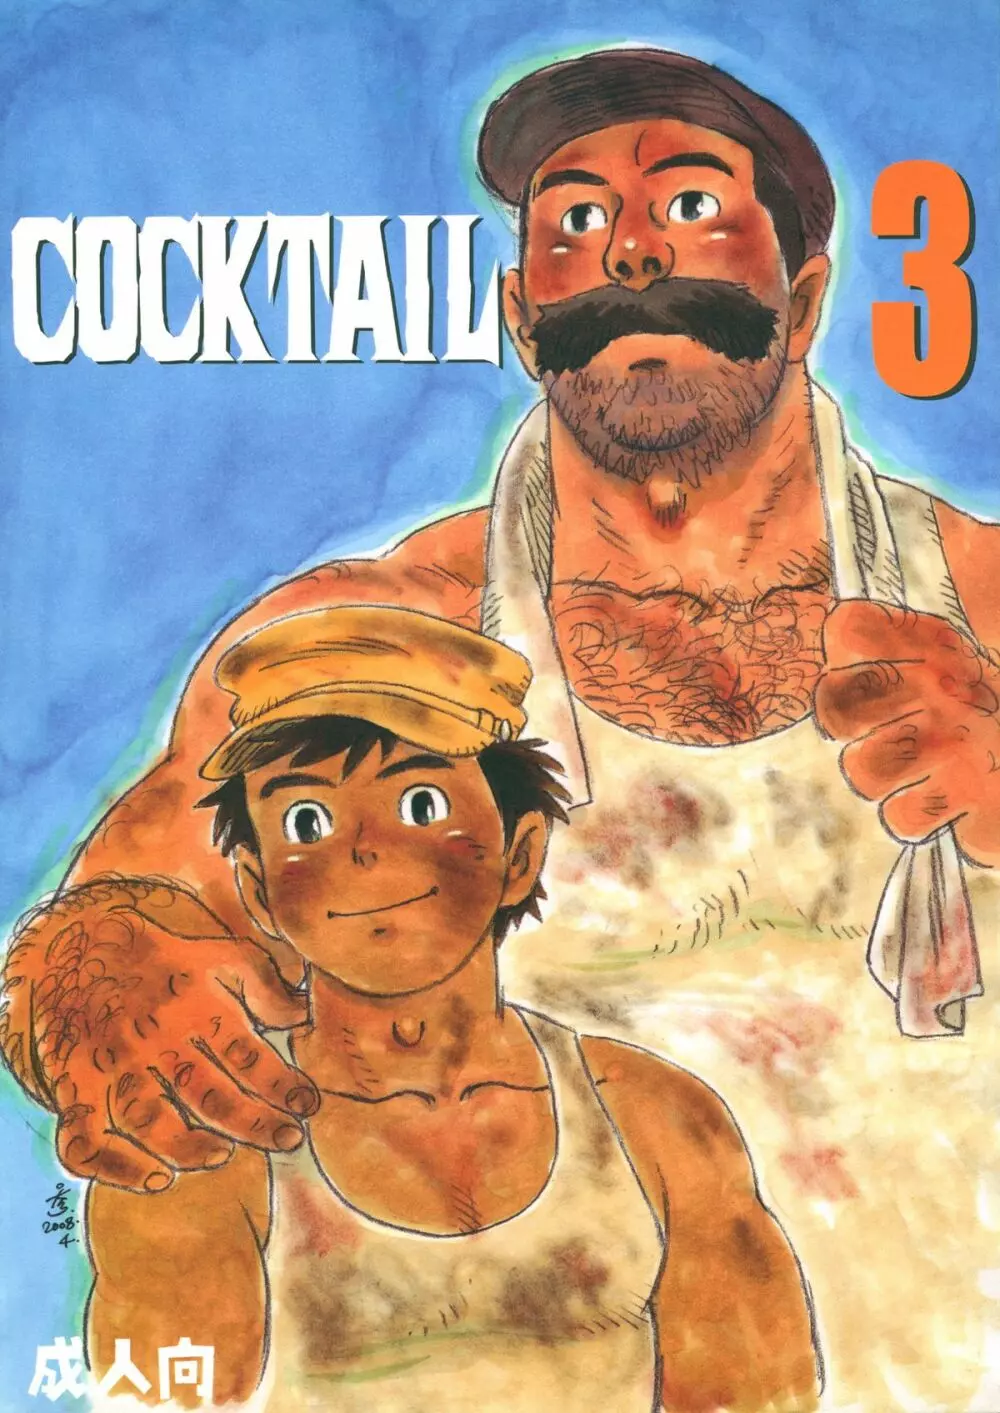 COCKTAIL 3